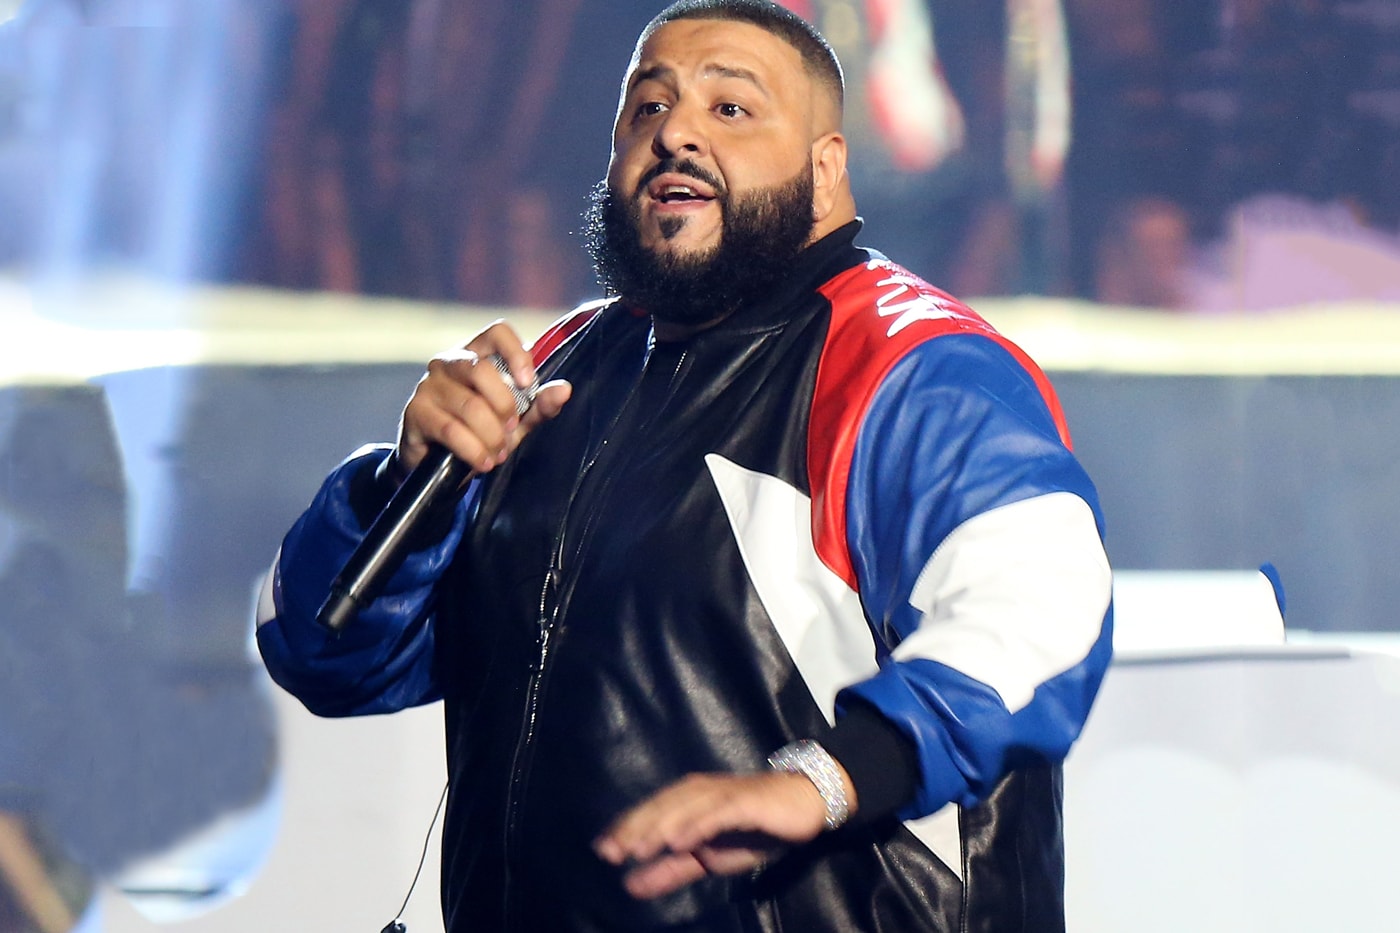 DJ Khaled Major Role 'Pitch Perfect 3' Acting